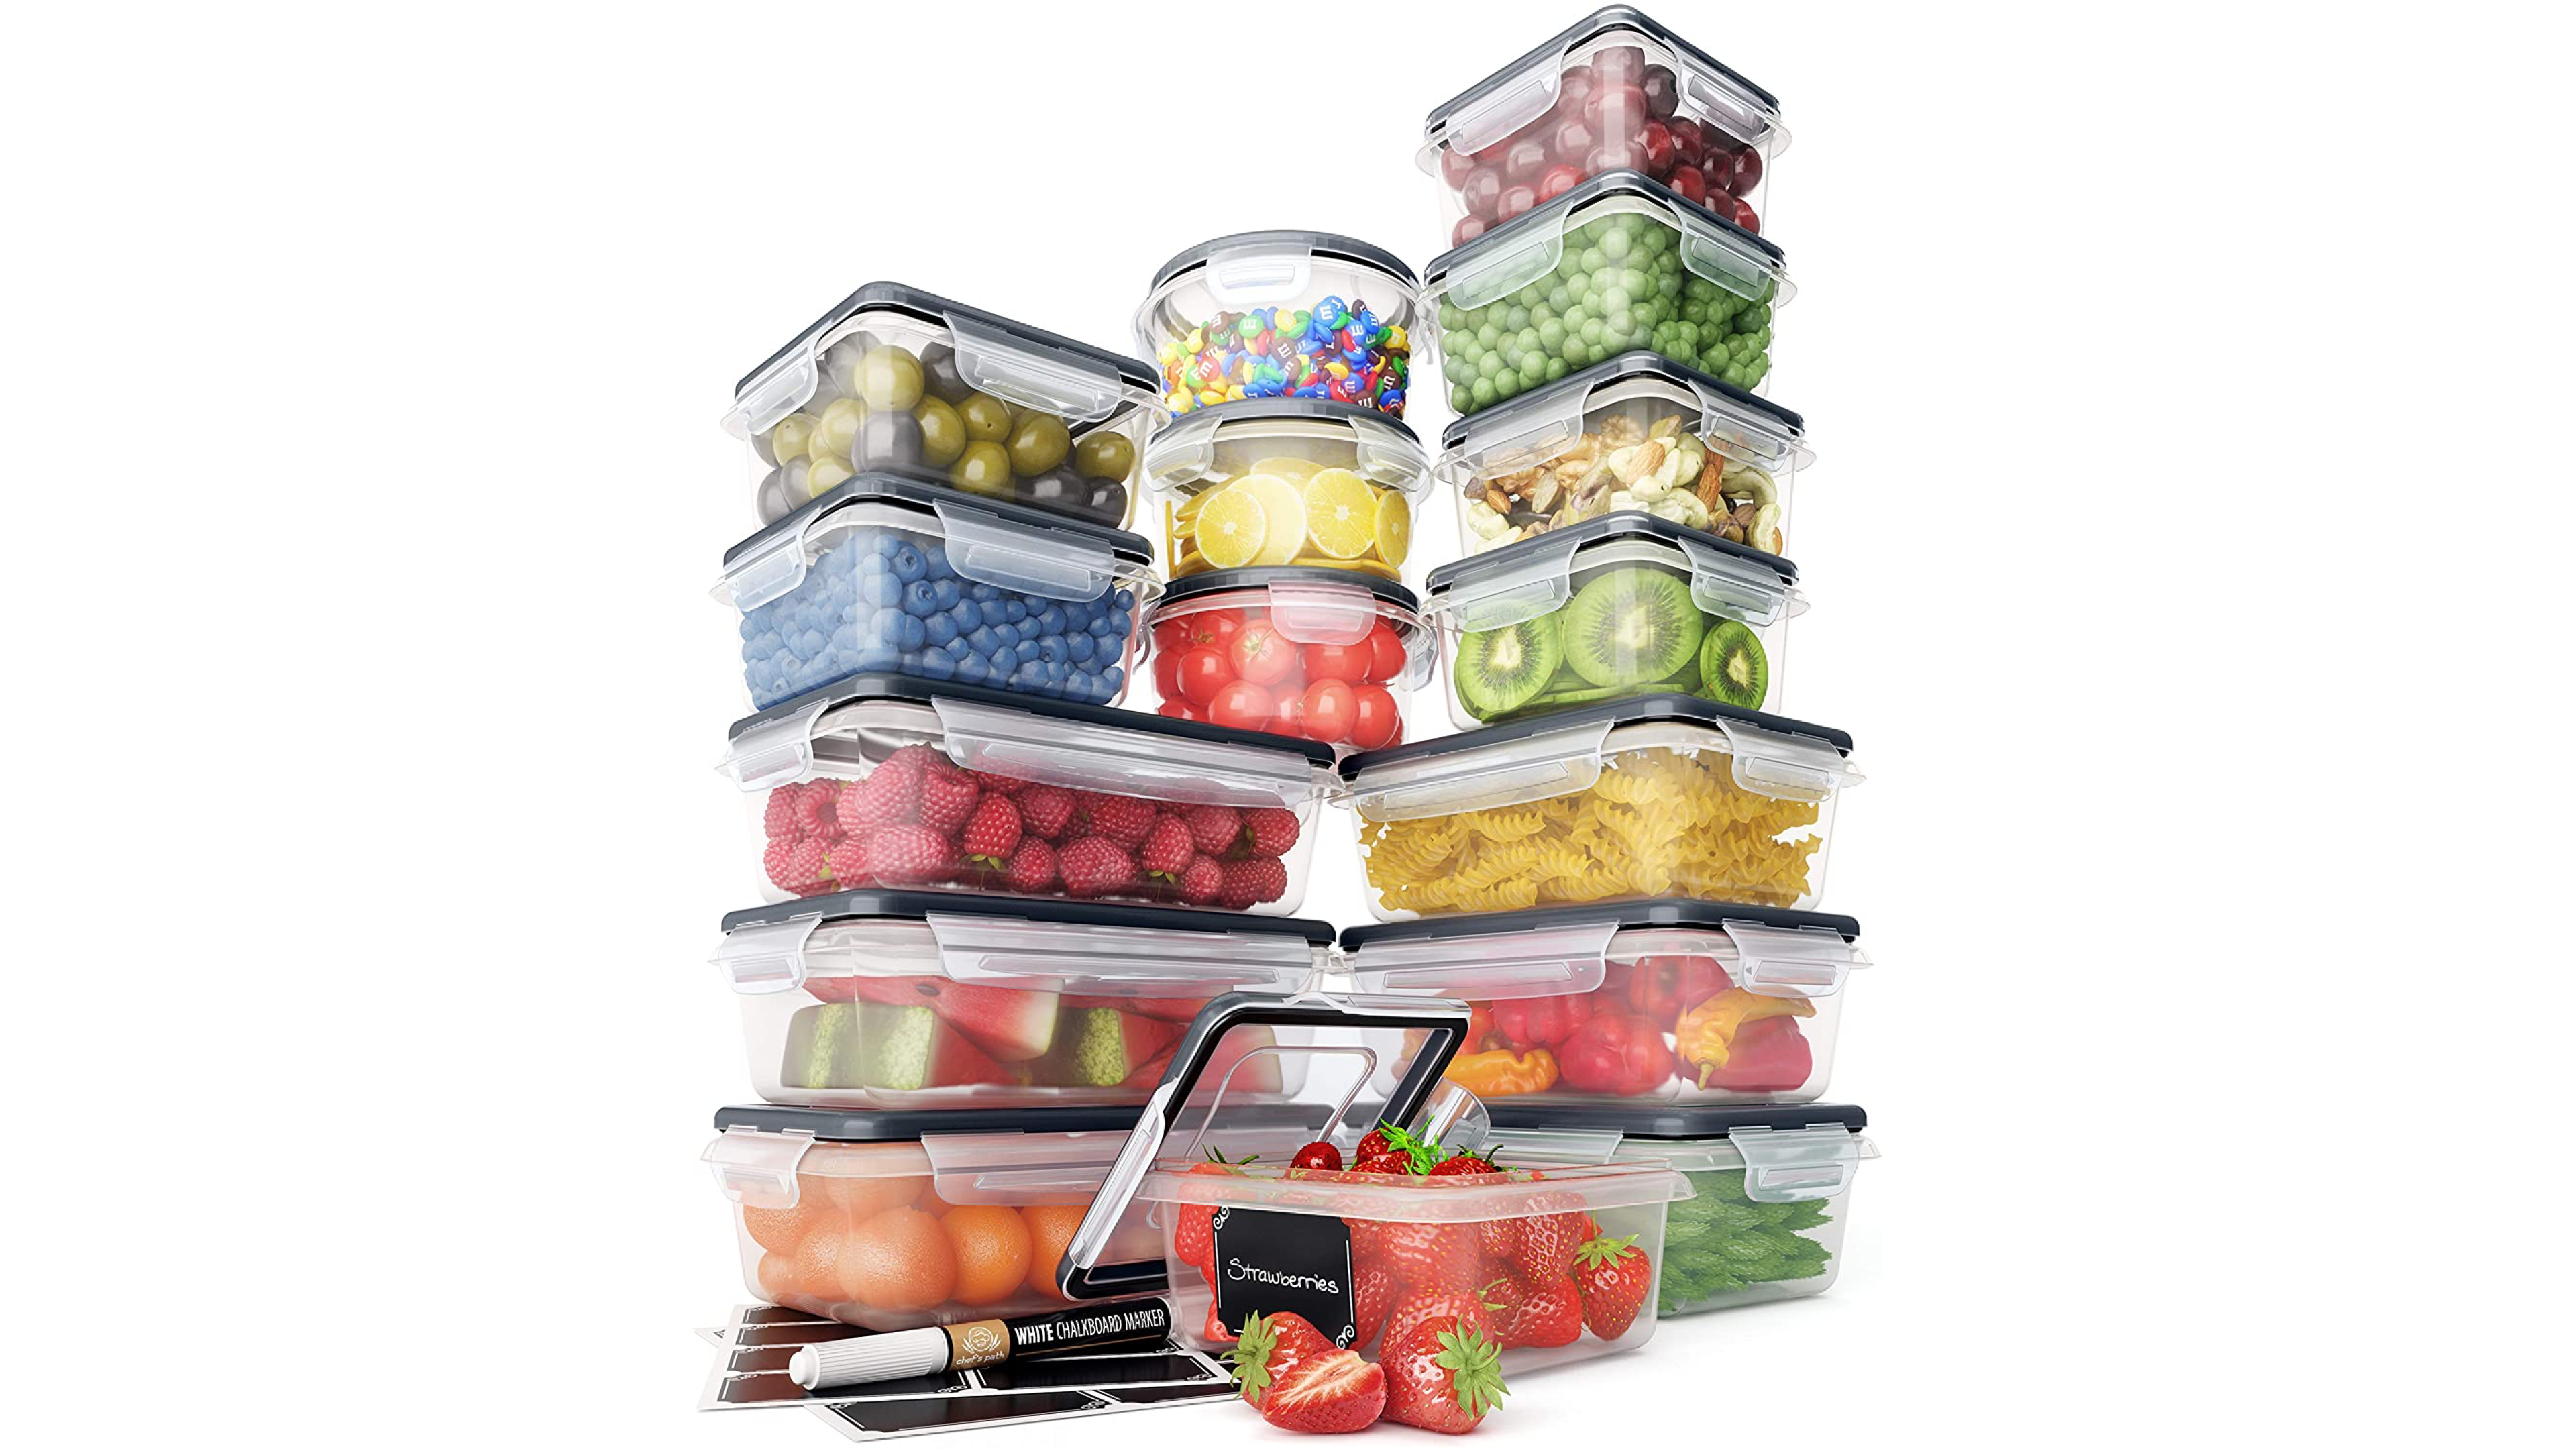 food storage containers for leftovers, fruit, ingredients, and loose food